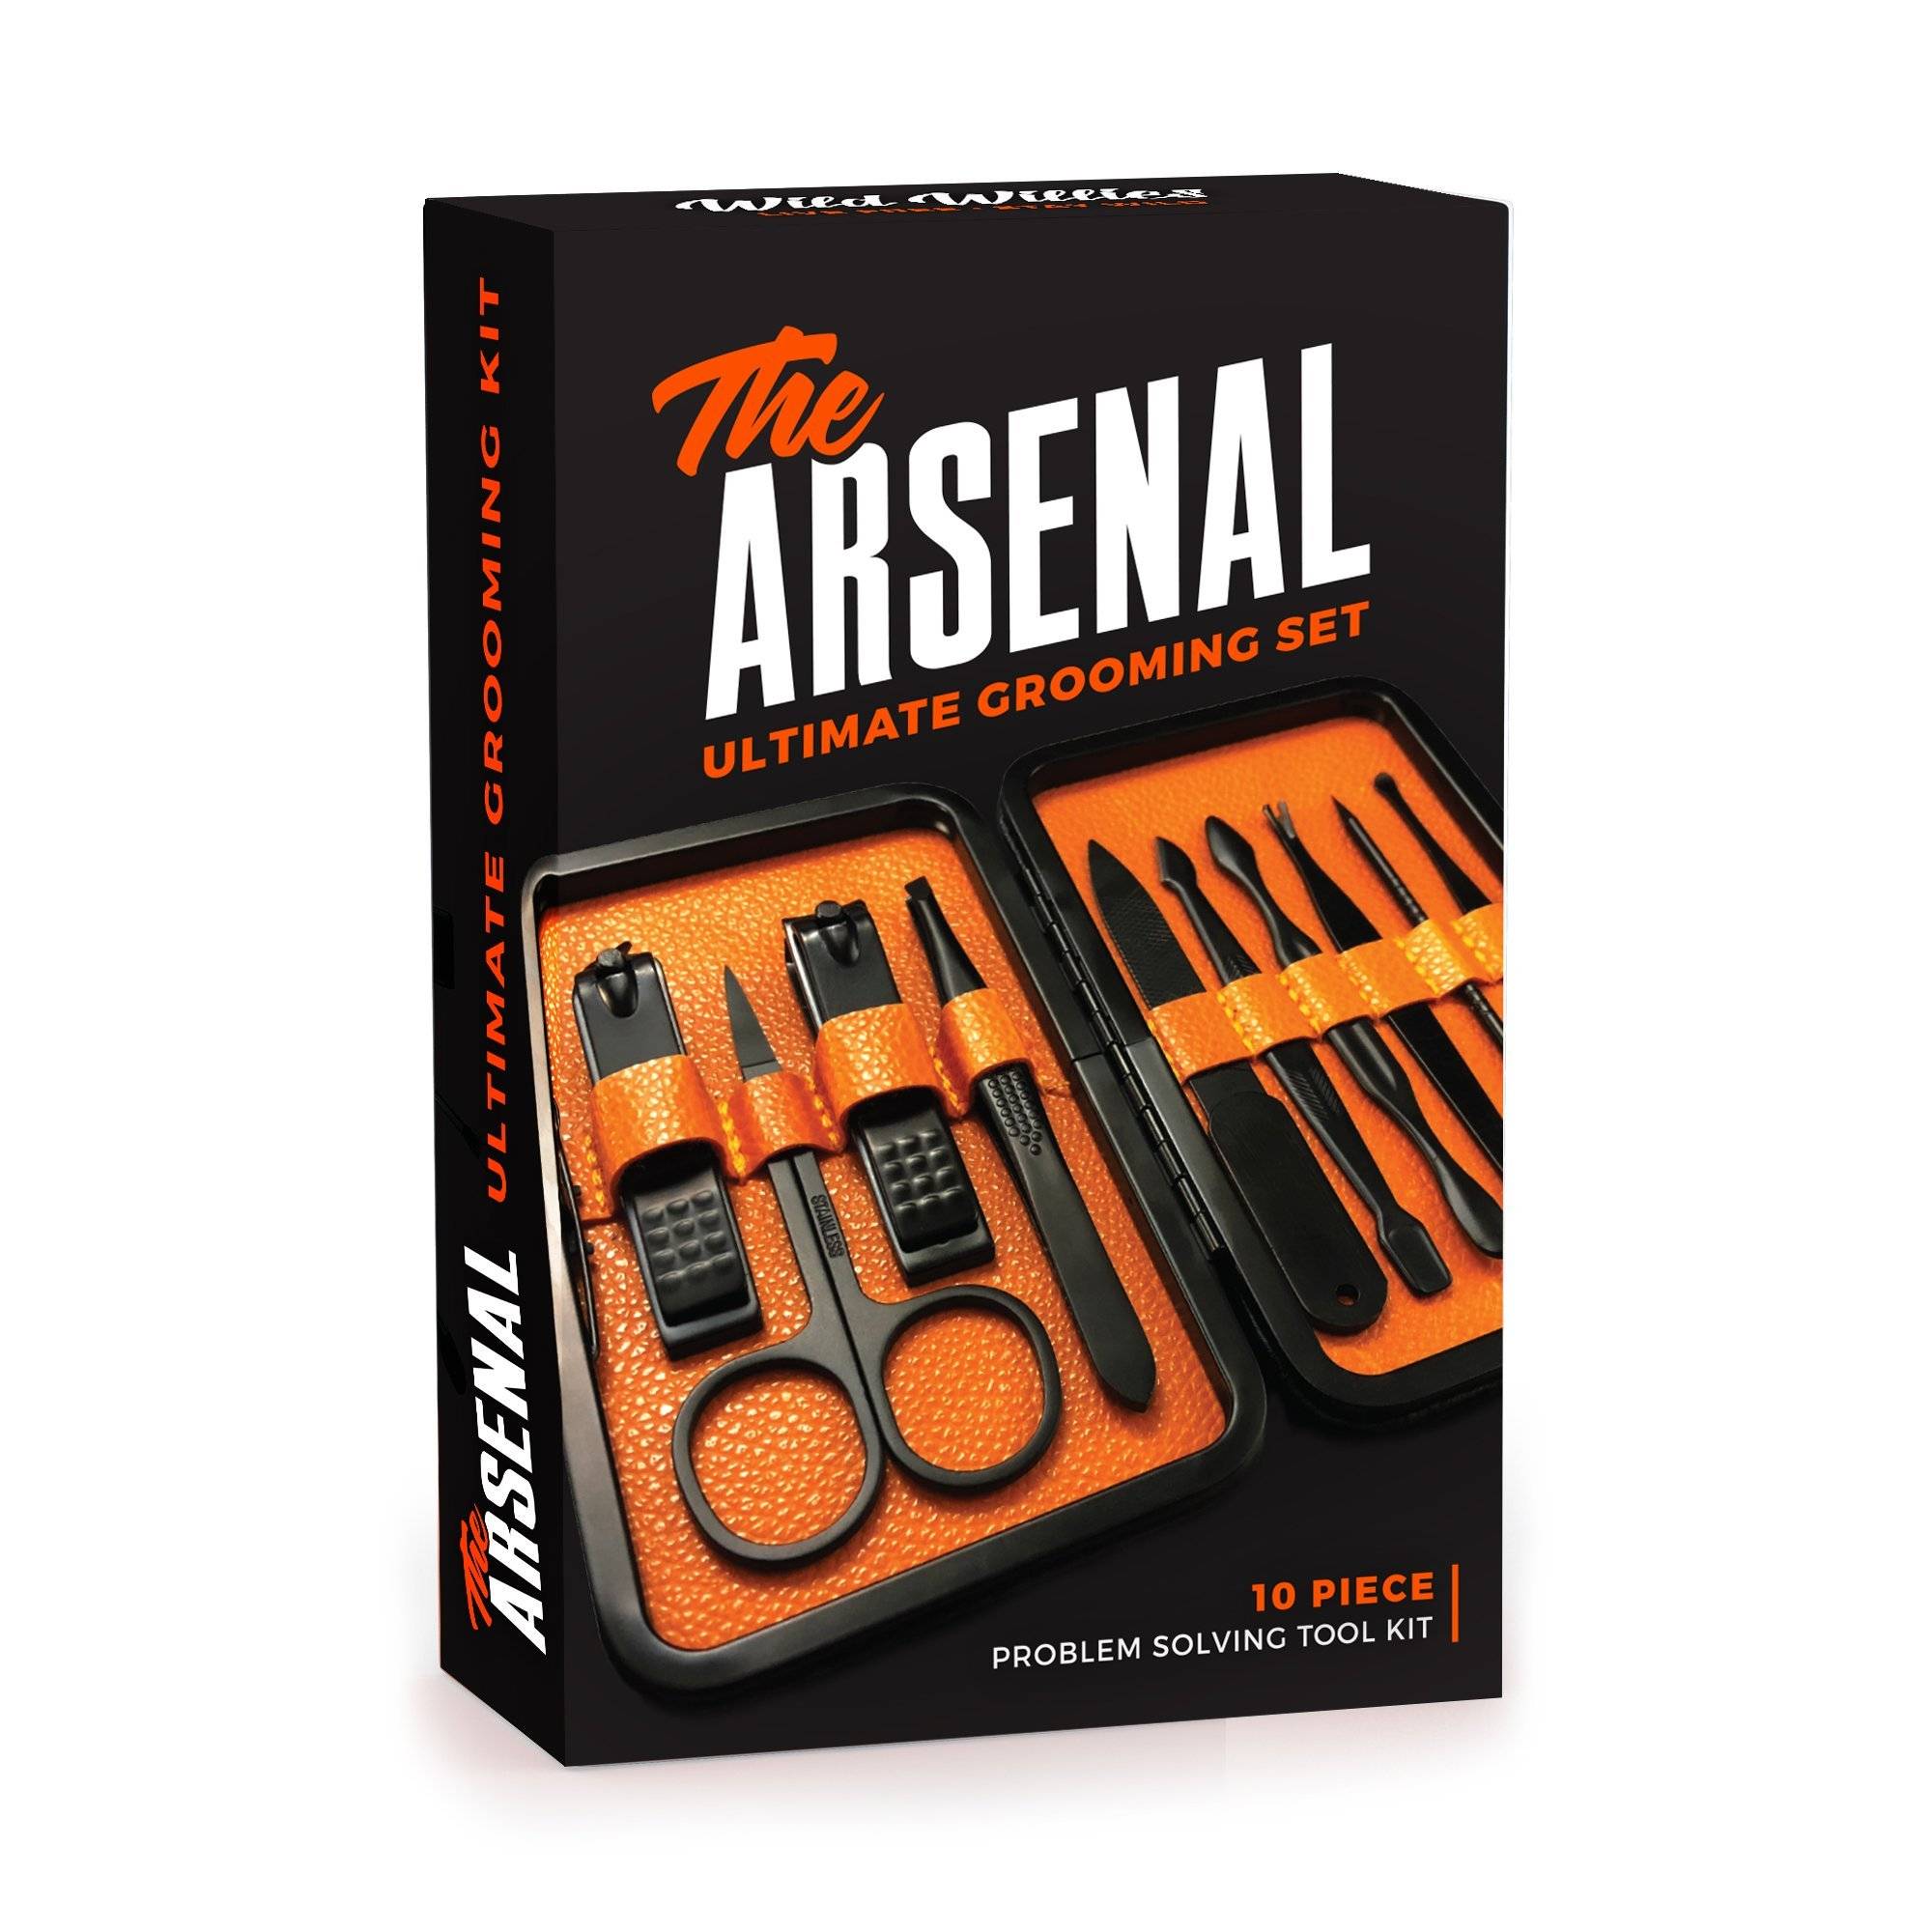 mens all in one grooming kit